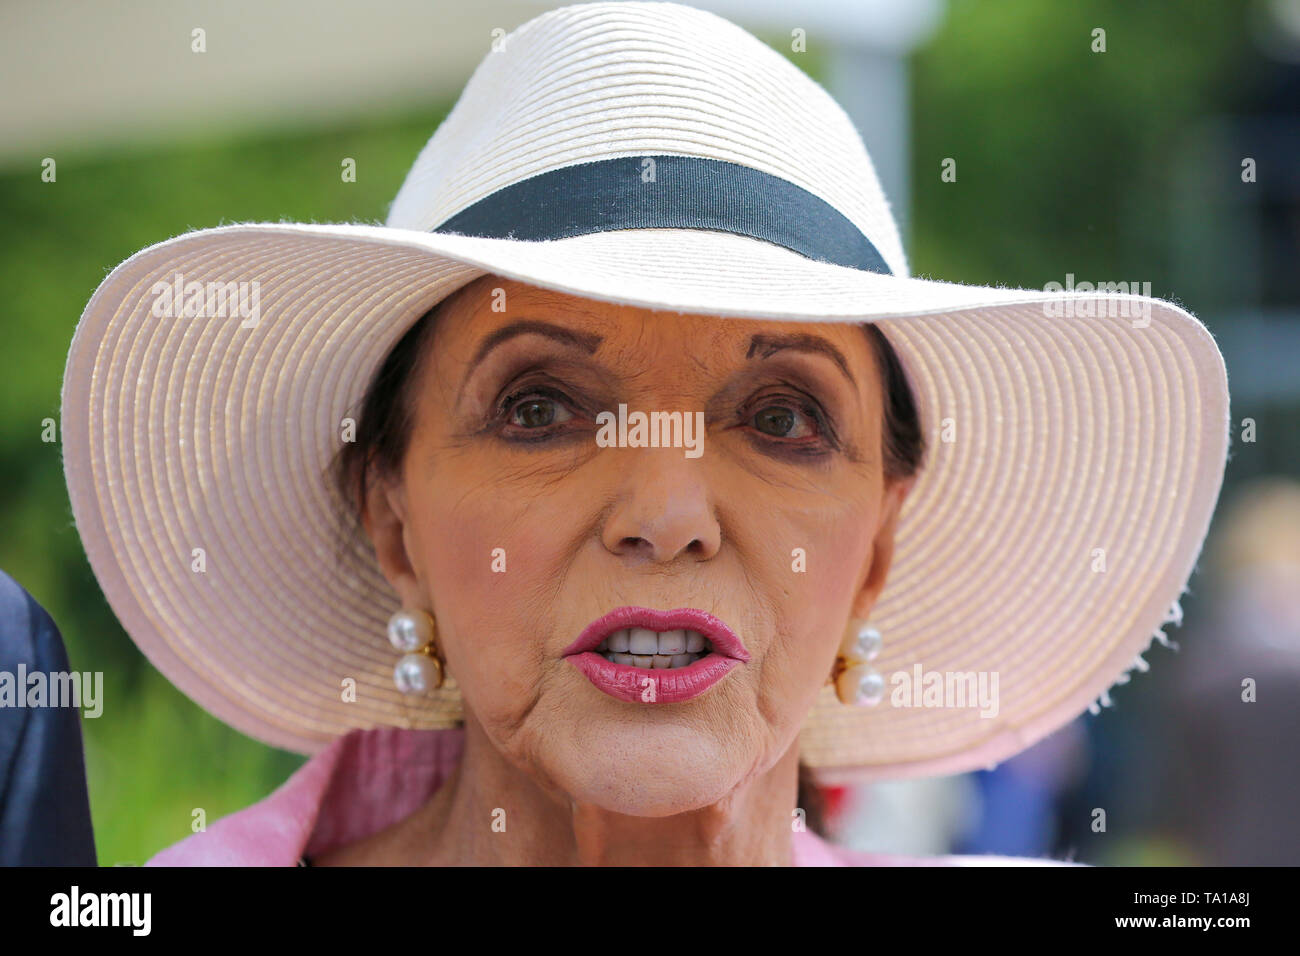 Joan Collins seen during the Chelsea Flower Show. The Royal Horticultural Society Chelsea Flower Show is an annual garden show over five days in the grounds of the Royal Hospital Chelsea in West London. The show is open to the public from 21 May until 25 May 2019. Stock Photo